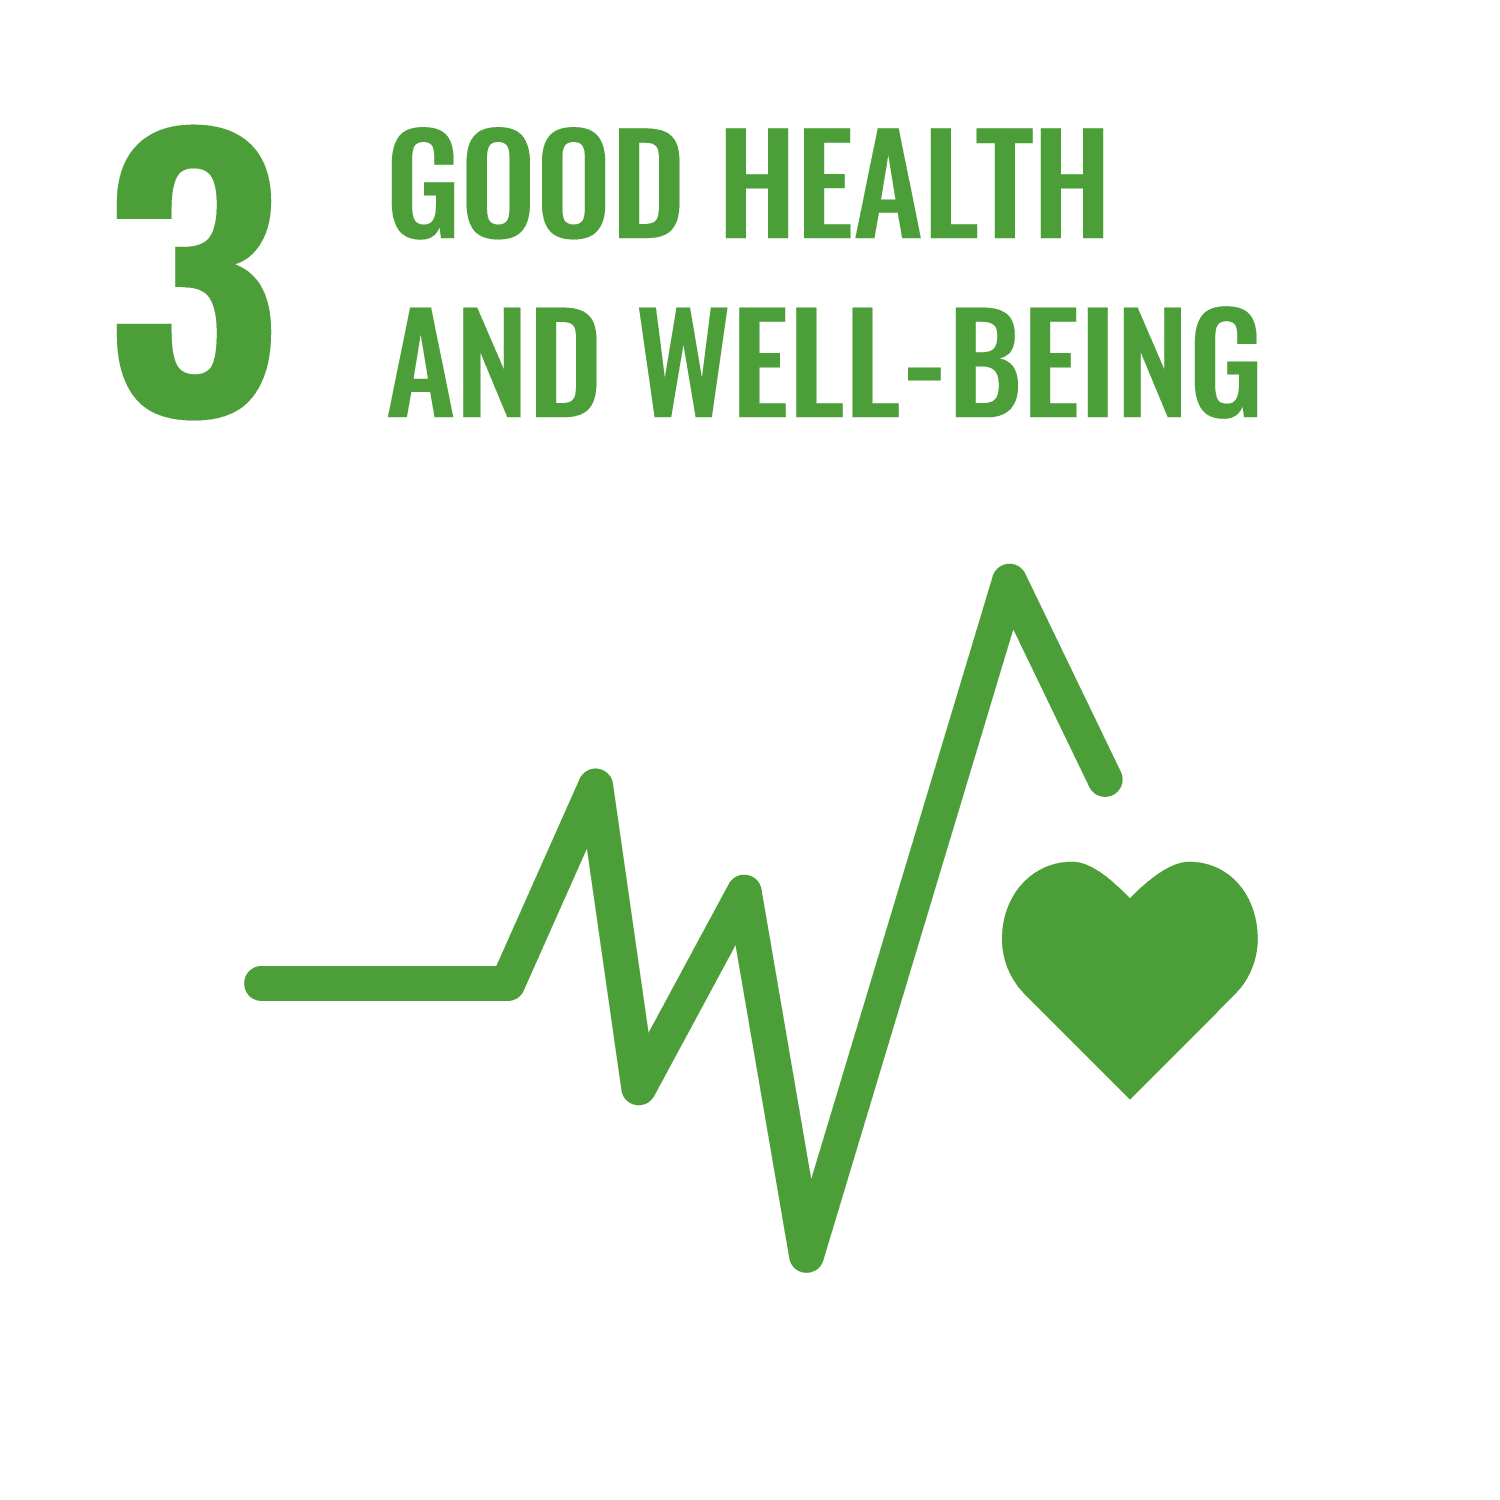 Goal 3, Good health and well-being